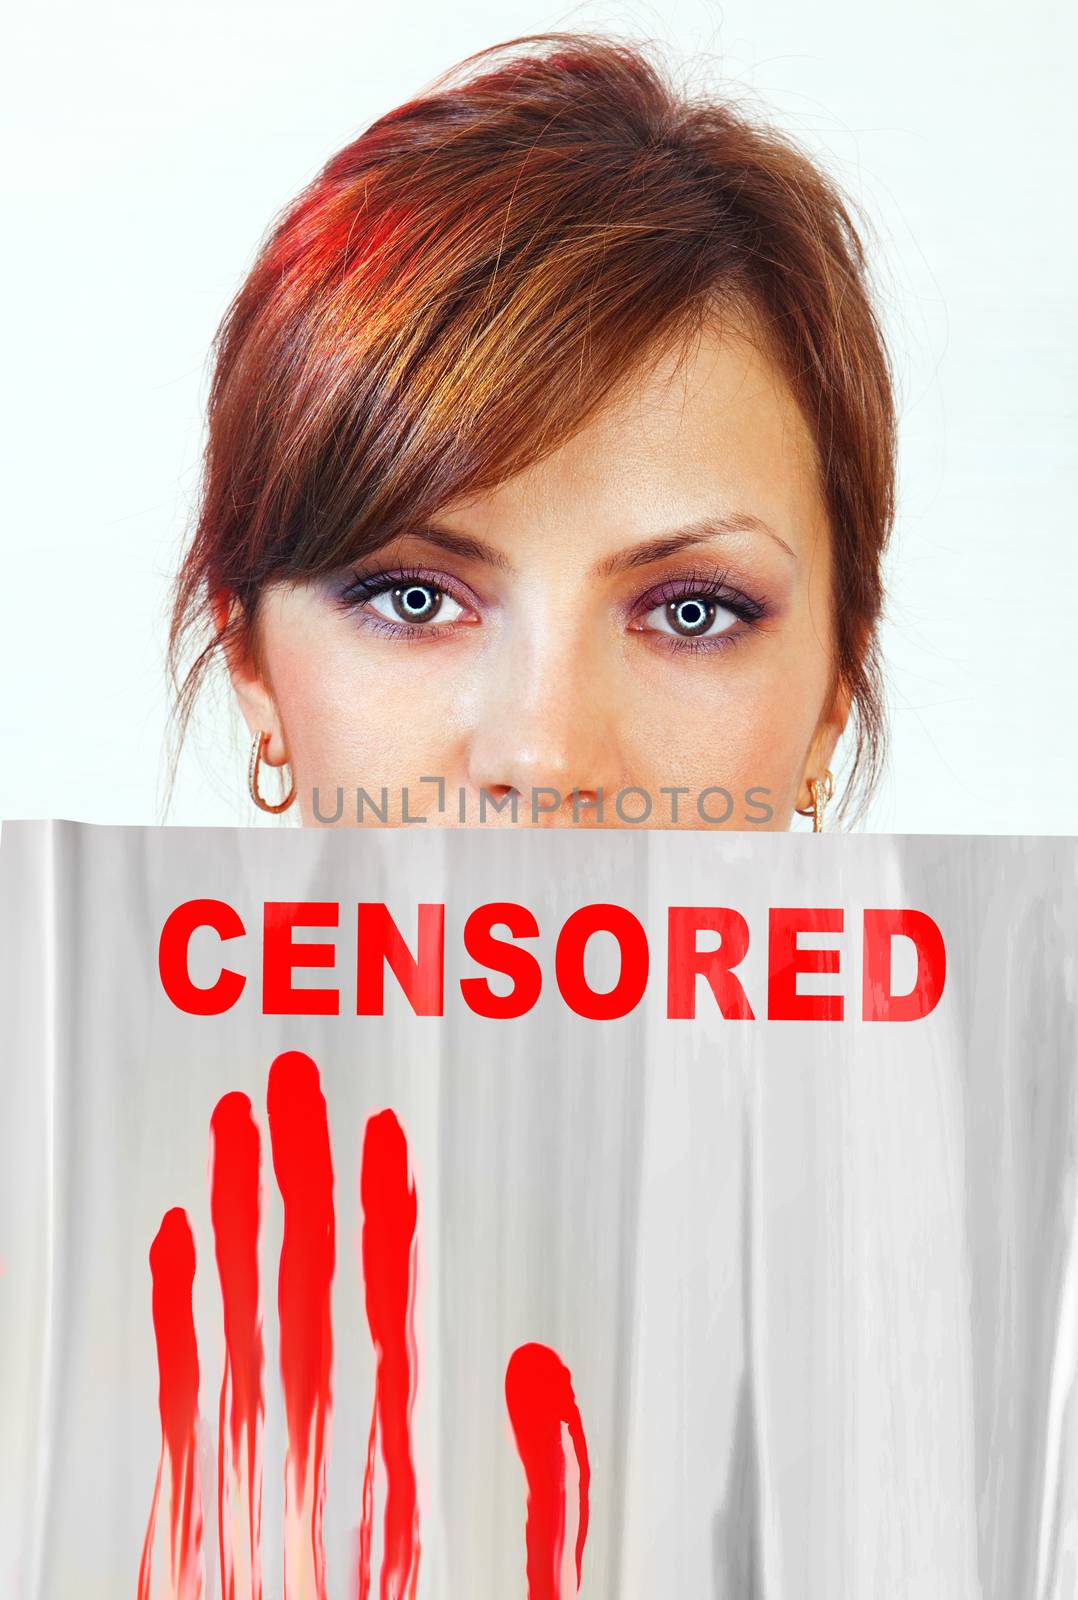 screen that covering part of woman face which represents censorship of statements